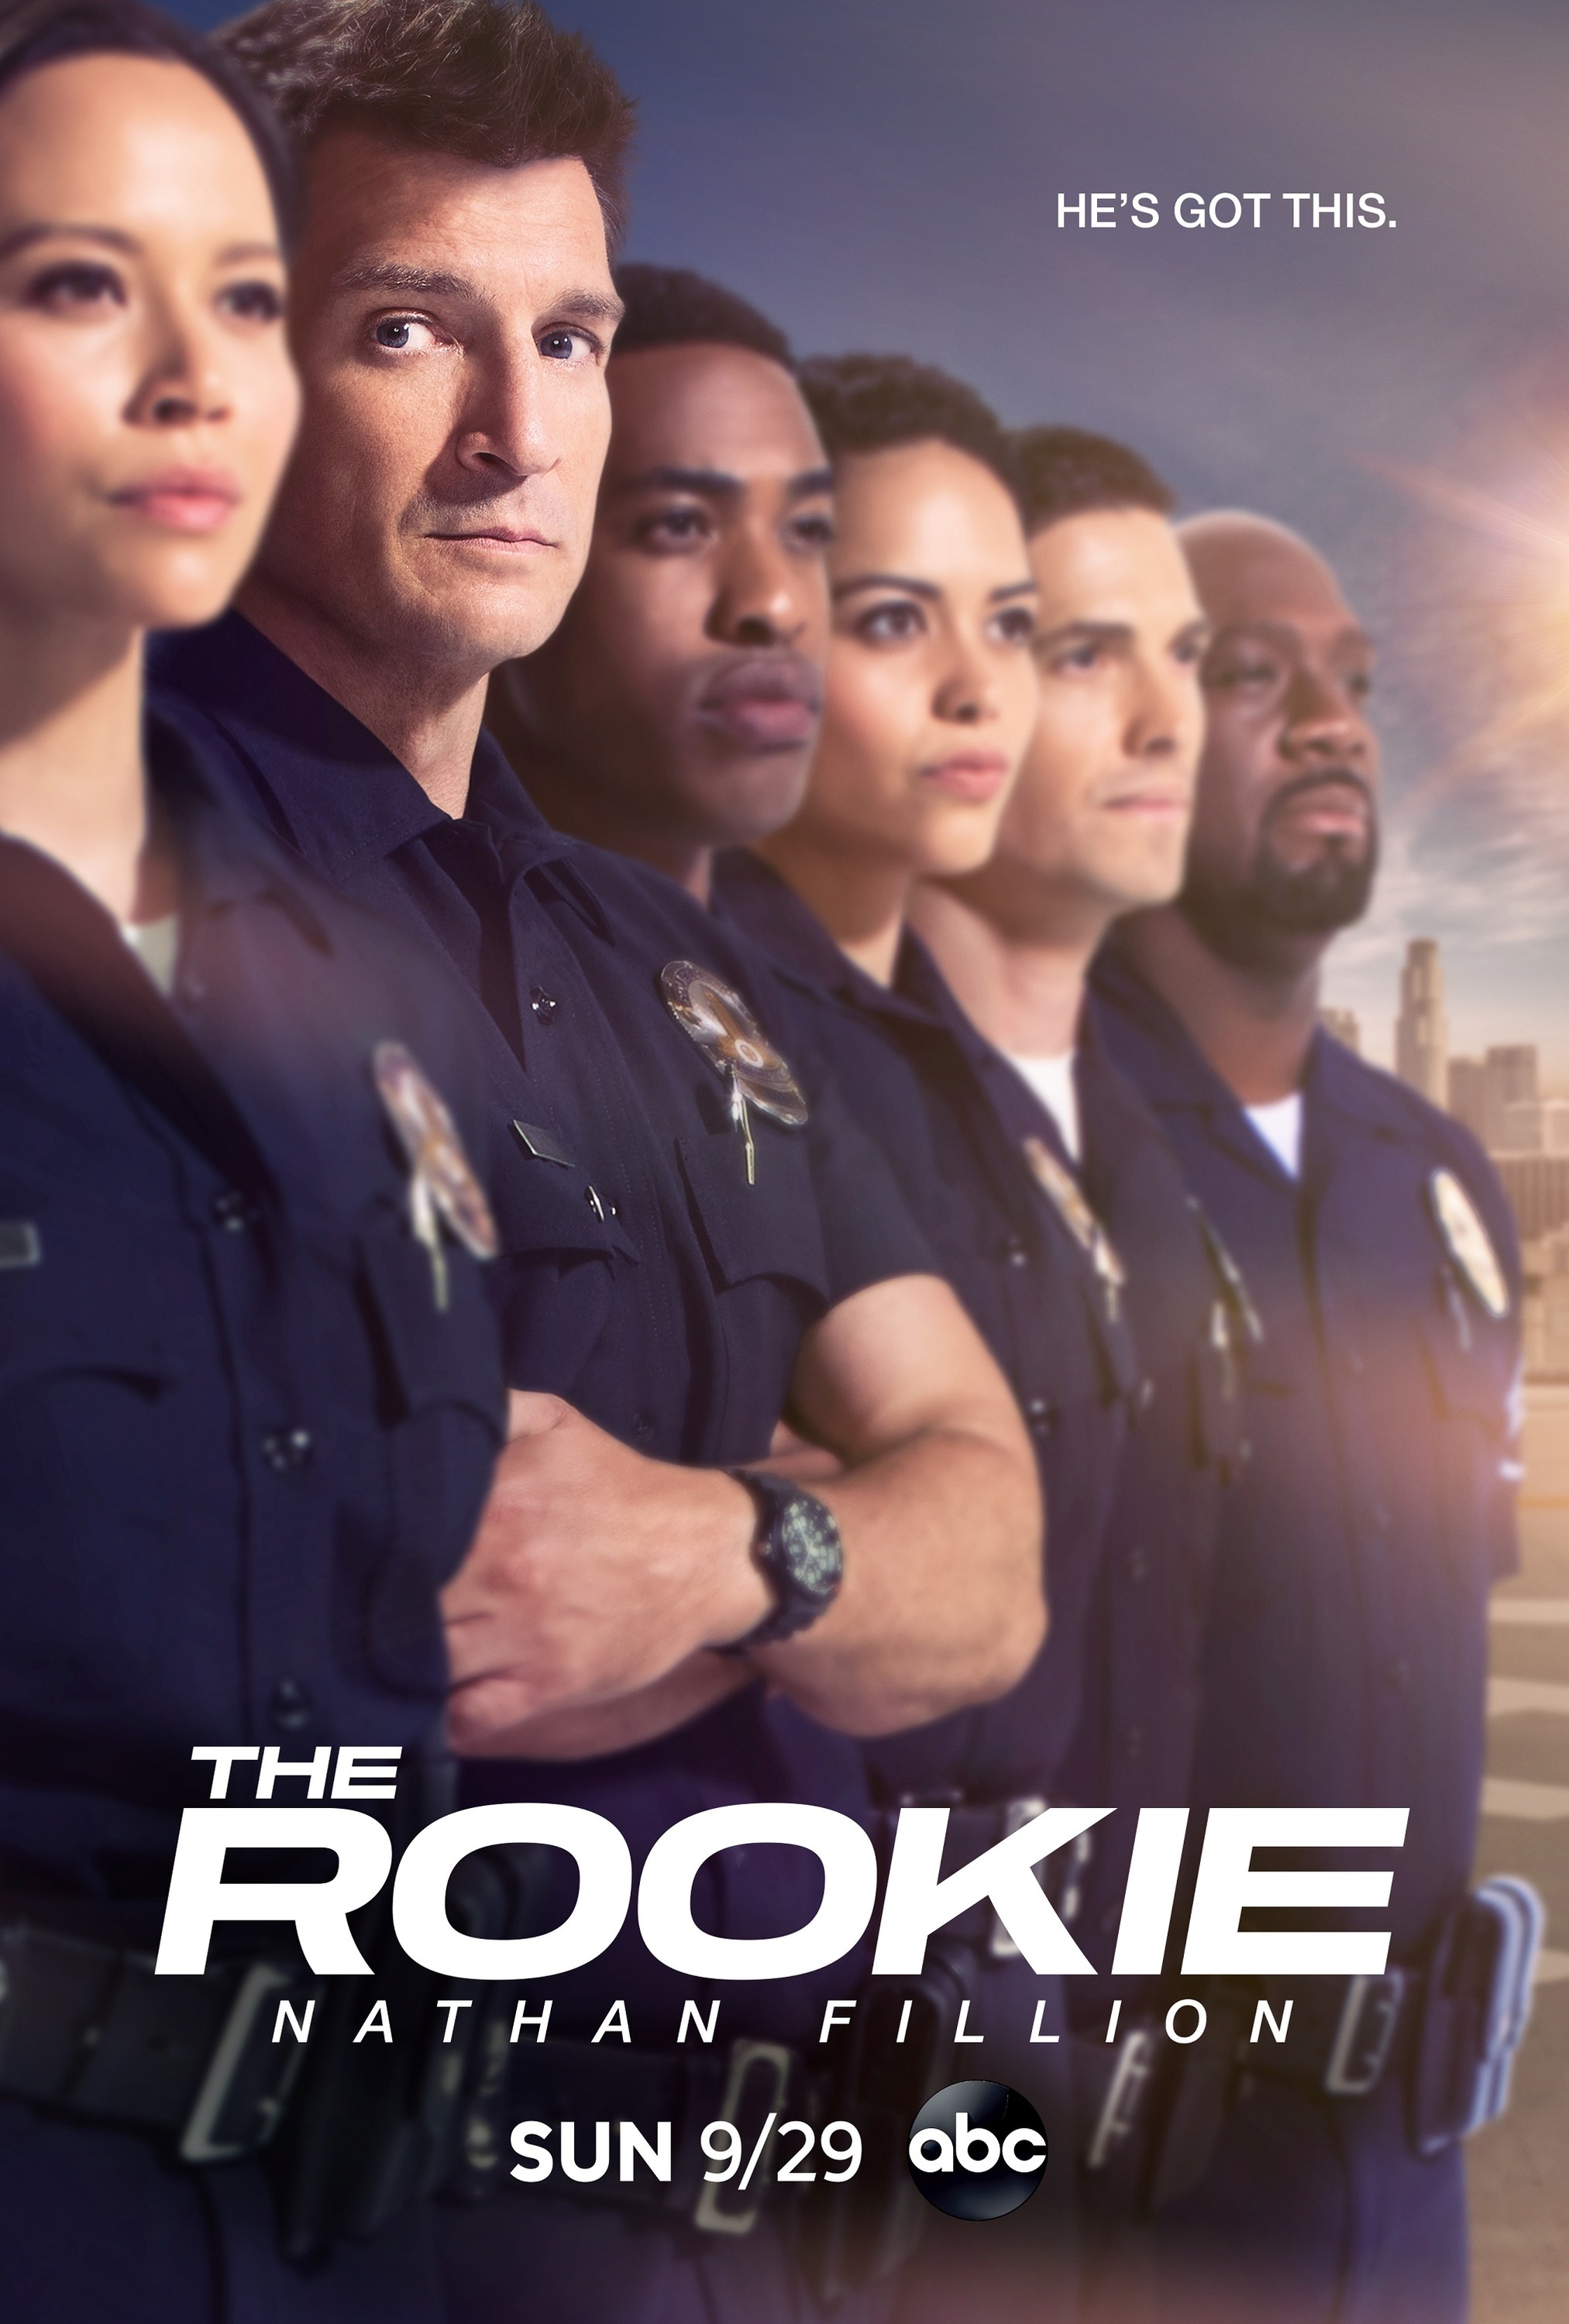 https://static.wikia.nocookie.net/the-rookie/images/f/f5/Season2_poster_2025x3000.jpg/revision/latest?cb=20190927122837